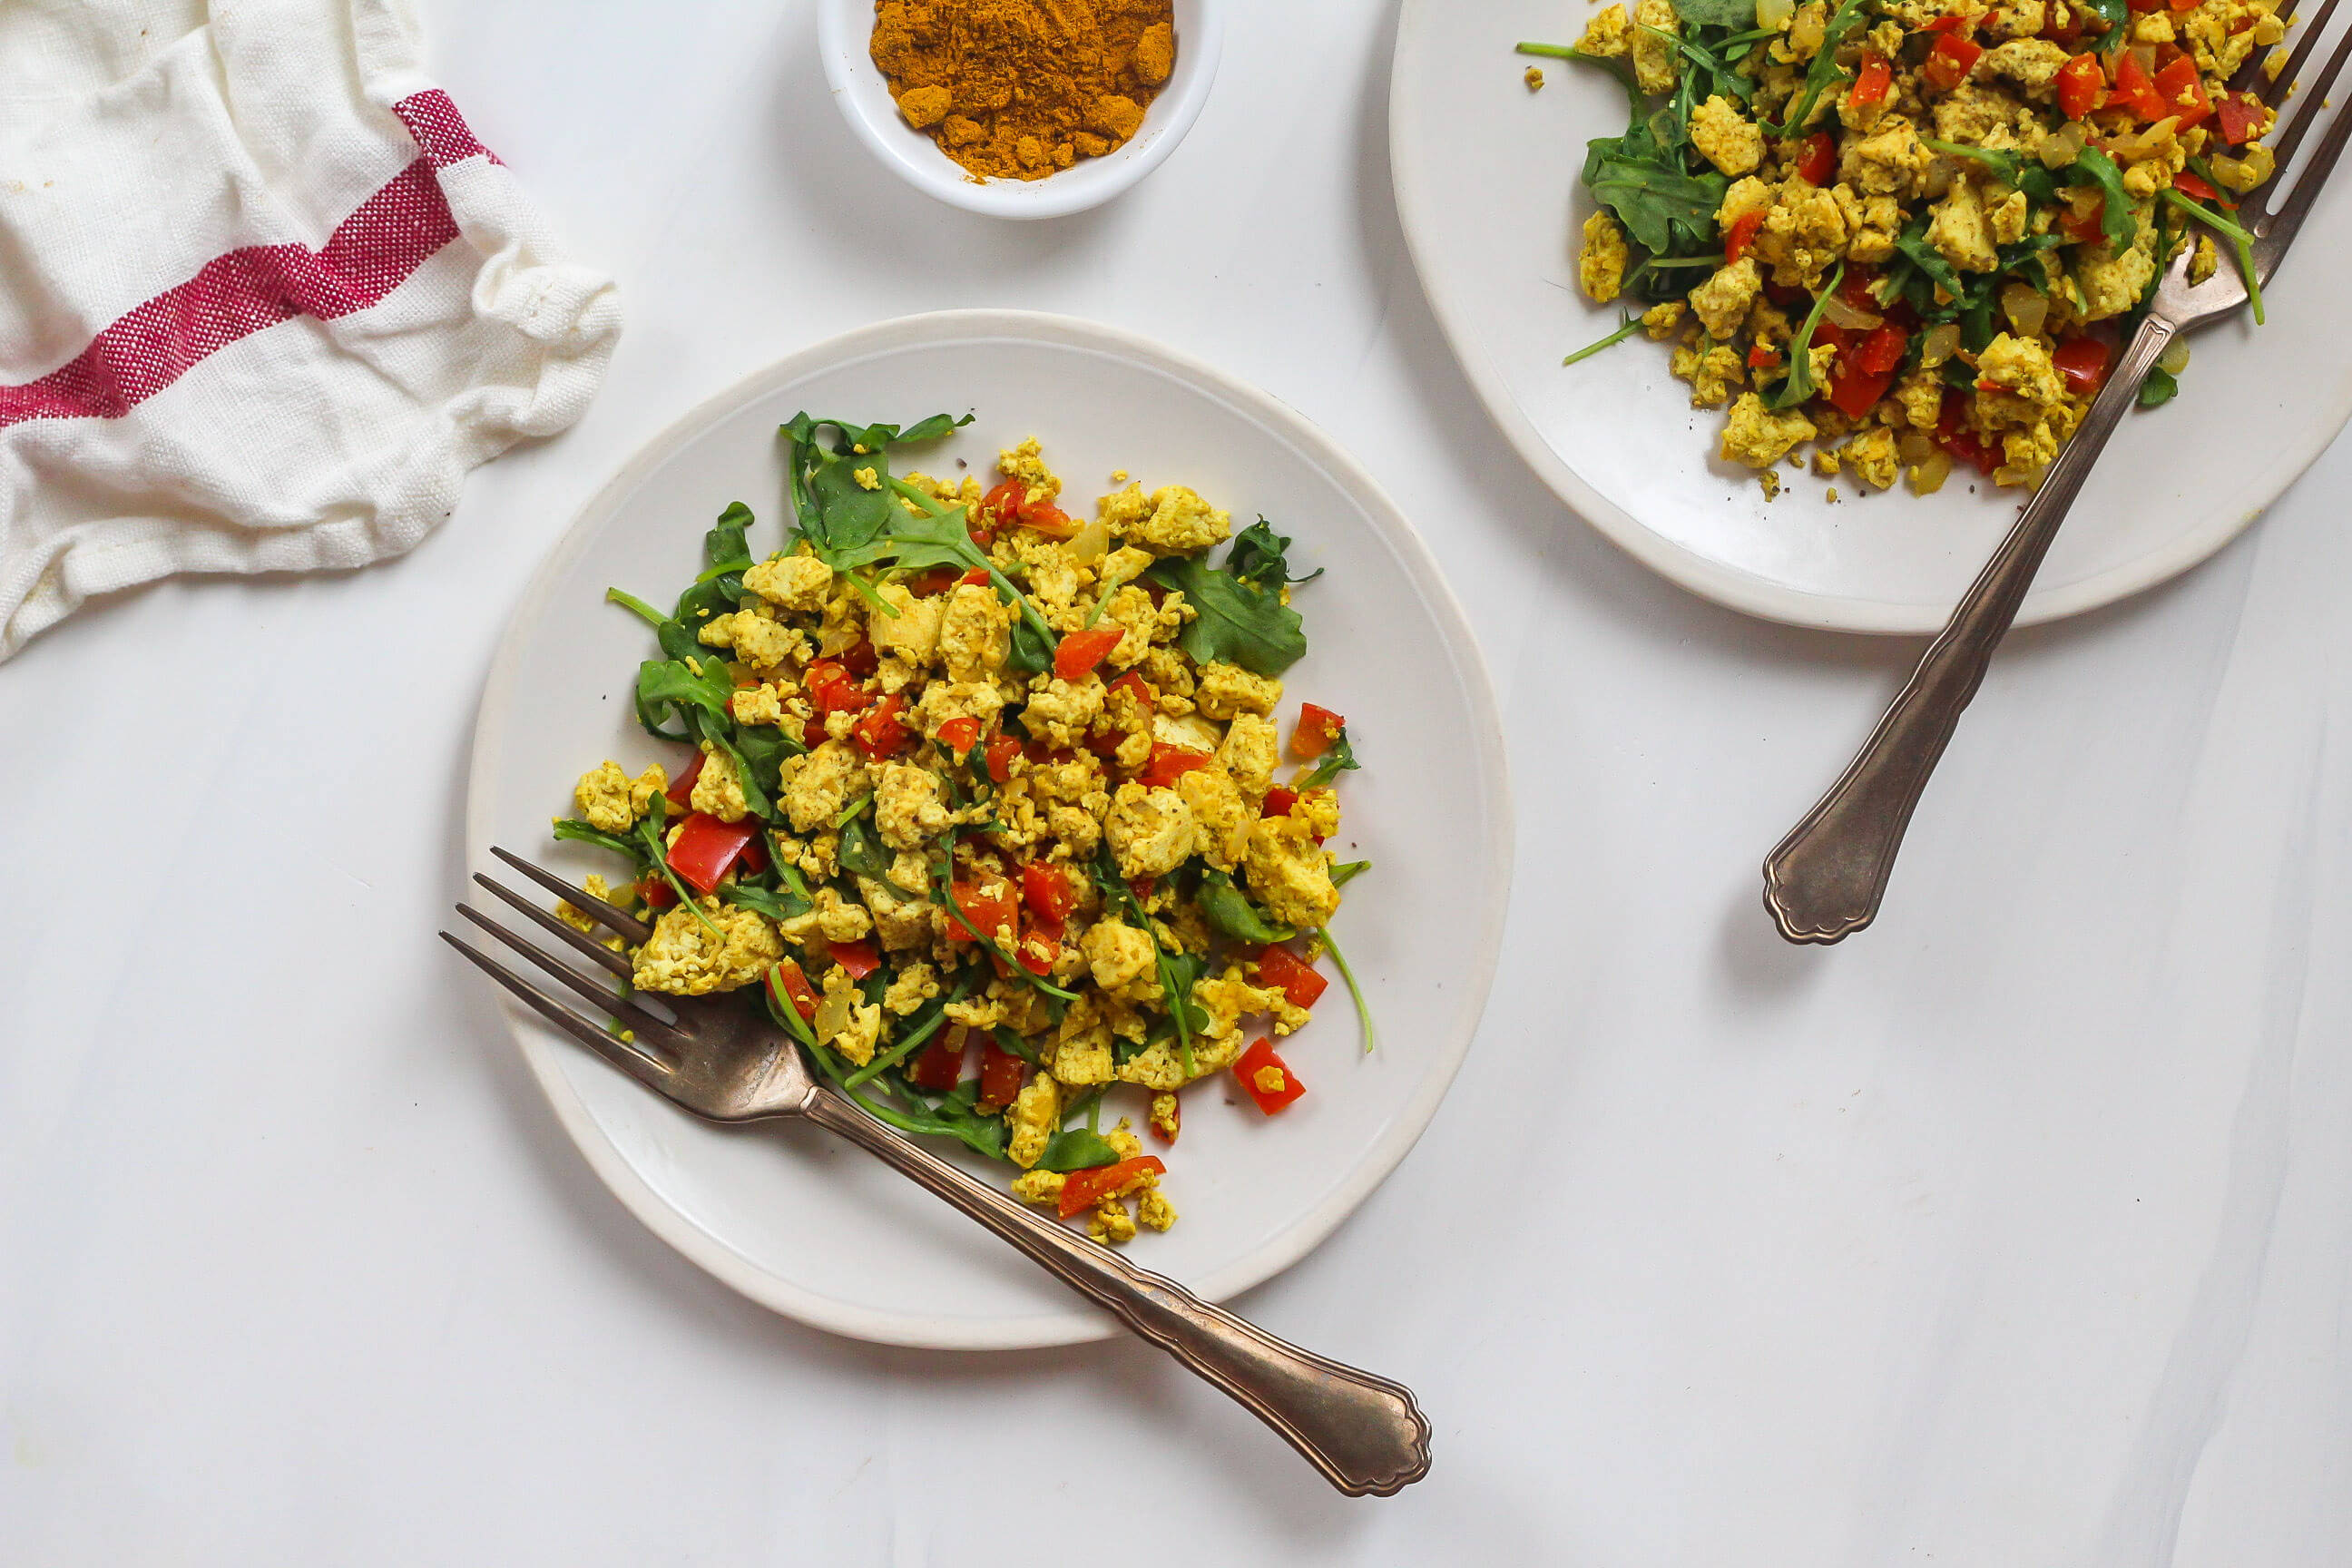 21 One Pan Meals Your Clients Will Love: Curried Tofu Scramble